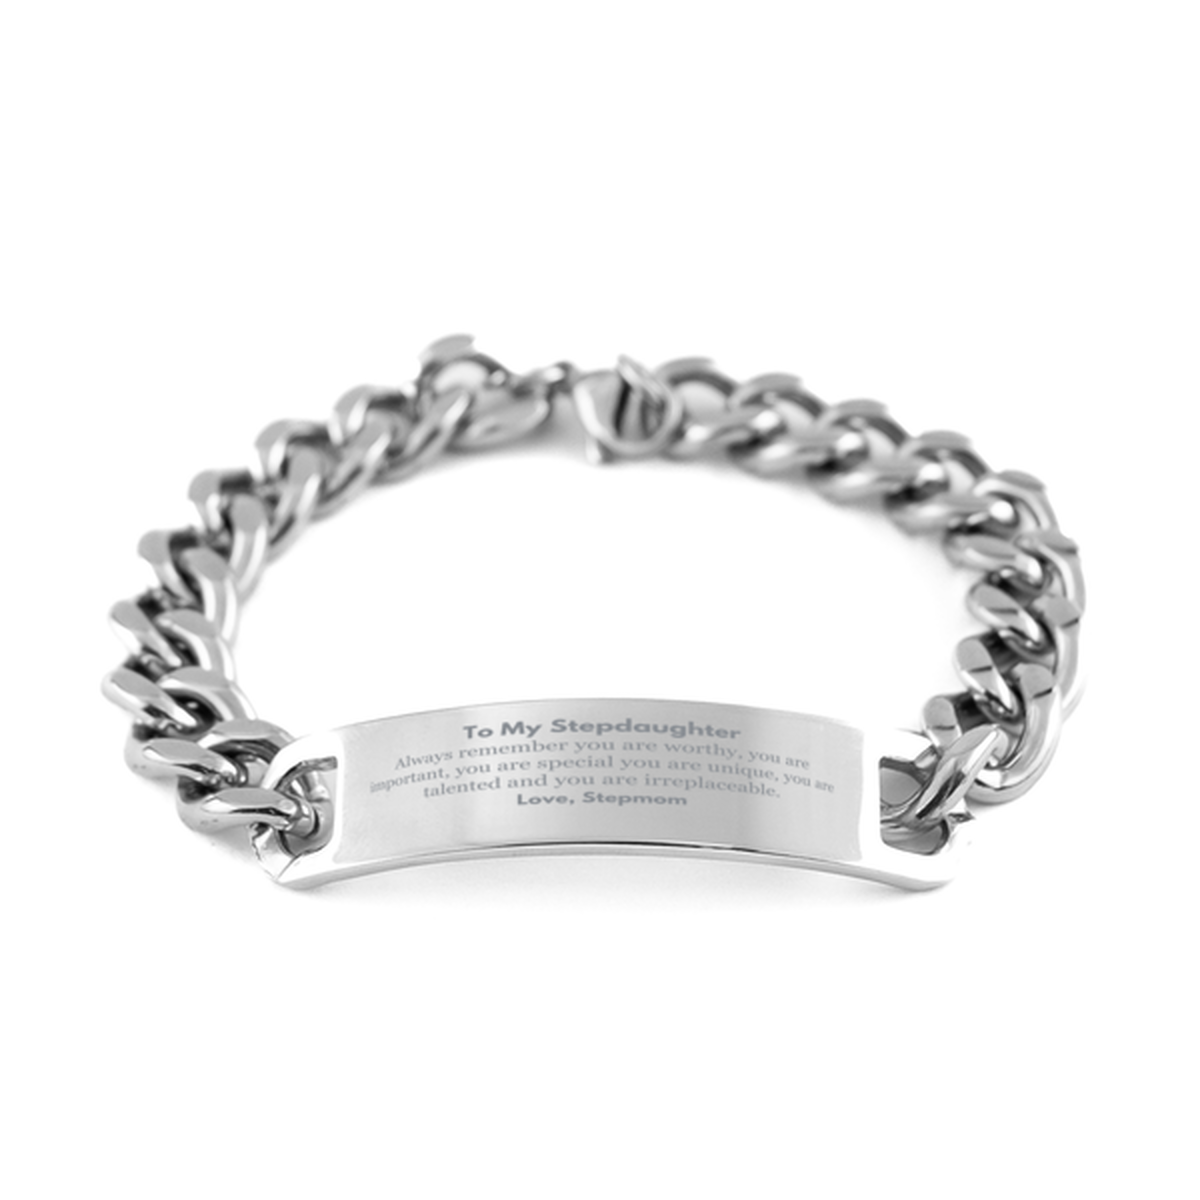 Stepdaughter Birthday Gifts from Stepmom, Inspirational Cuban Chain Stainless Steel Bracelet for Stepdaughter Christmas Graduation Gifts for Stepdaughter Always remember you are worthy, you are important. Love, Stepmom